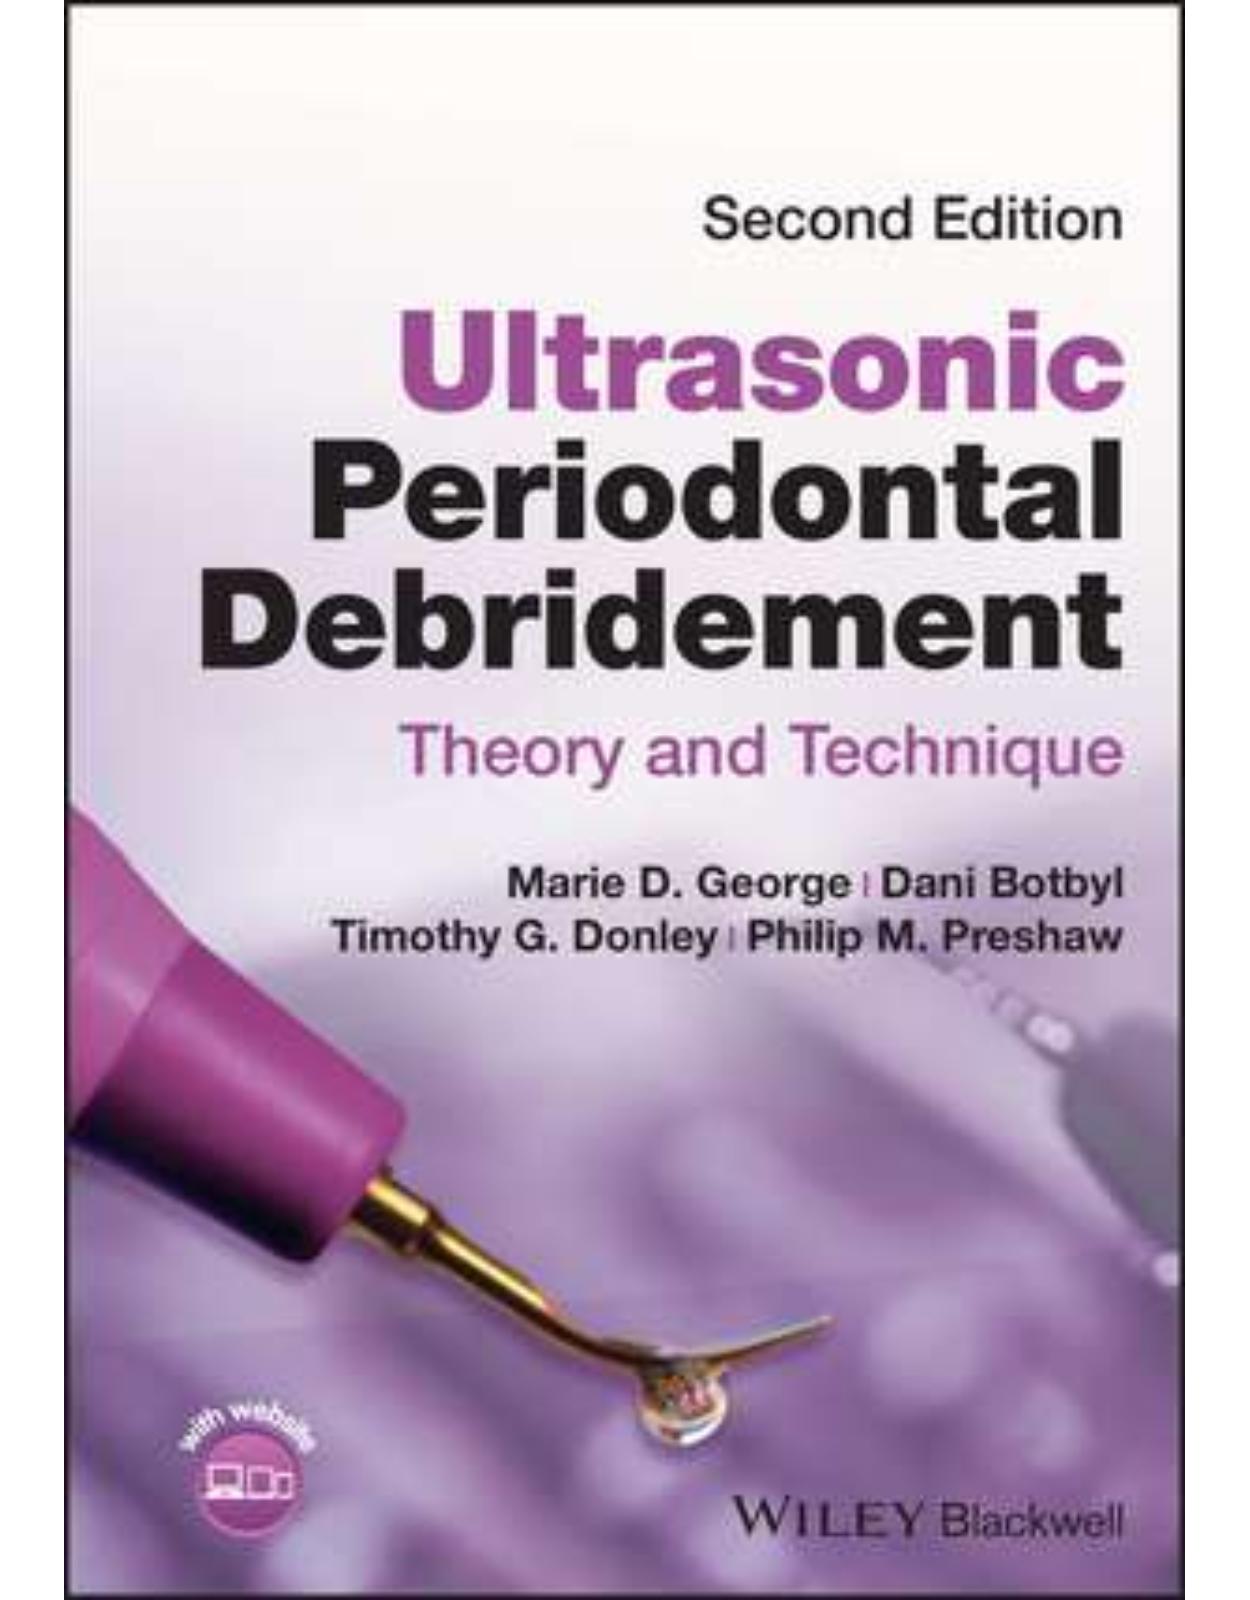 Ultrasonic Periodontal Debridement – Theory and Technique